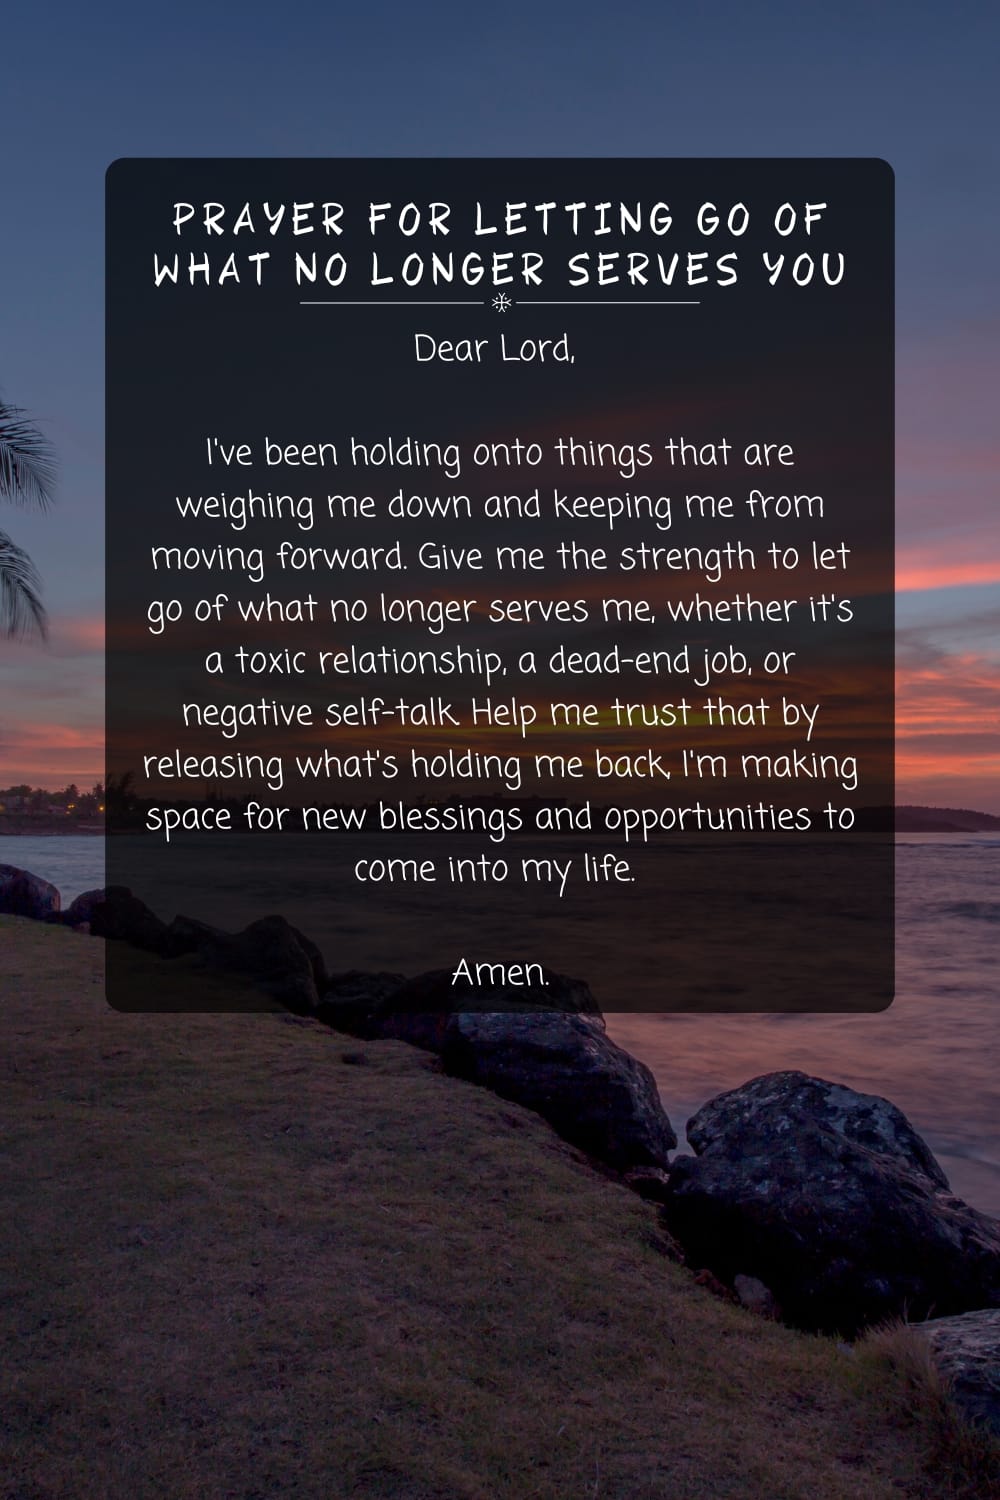 Prayer For Letting Go of What No Longer Serves You